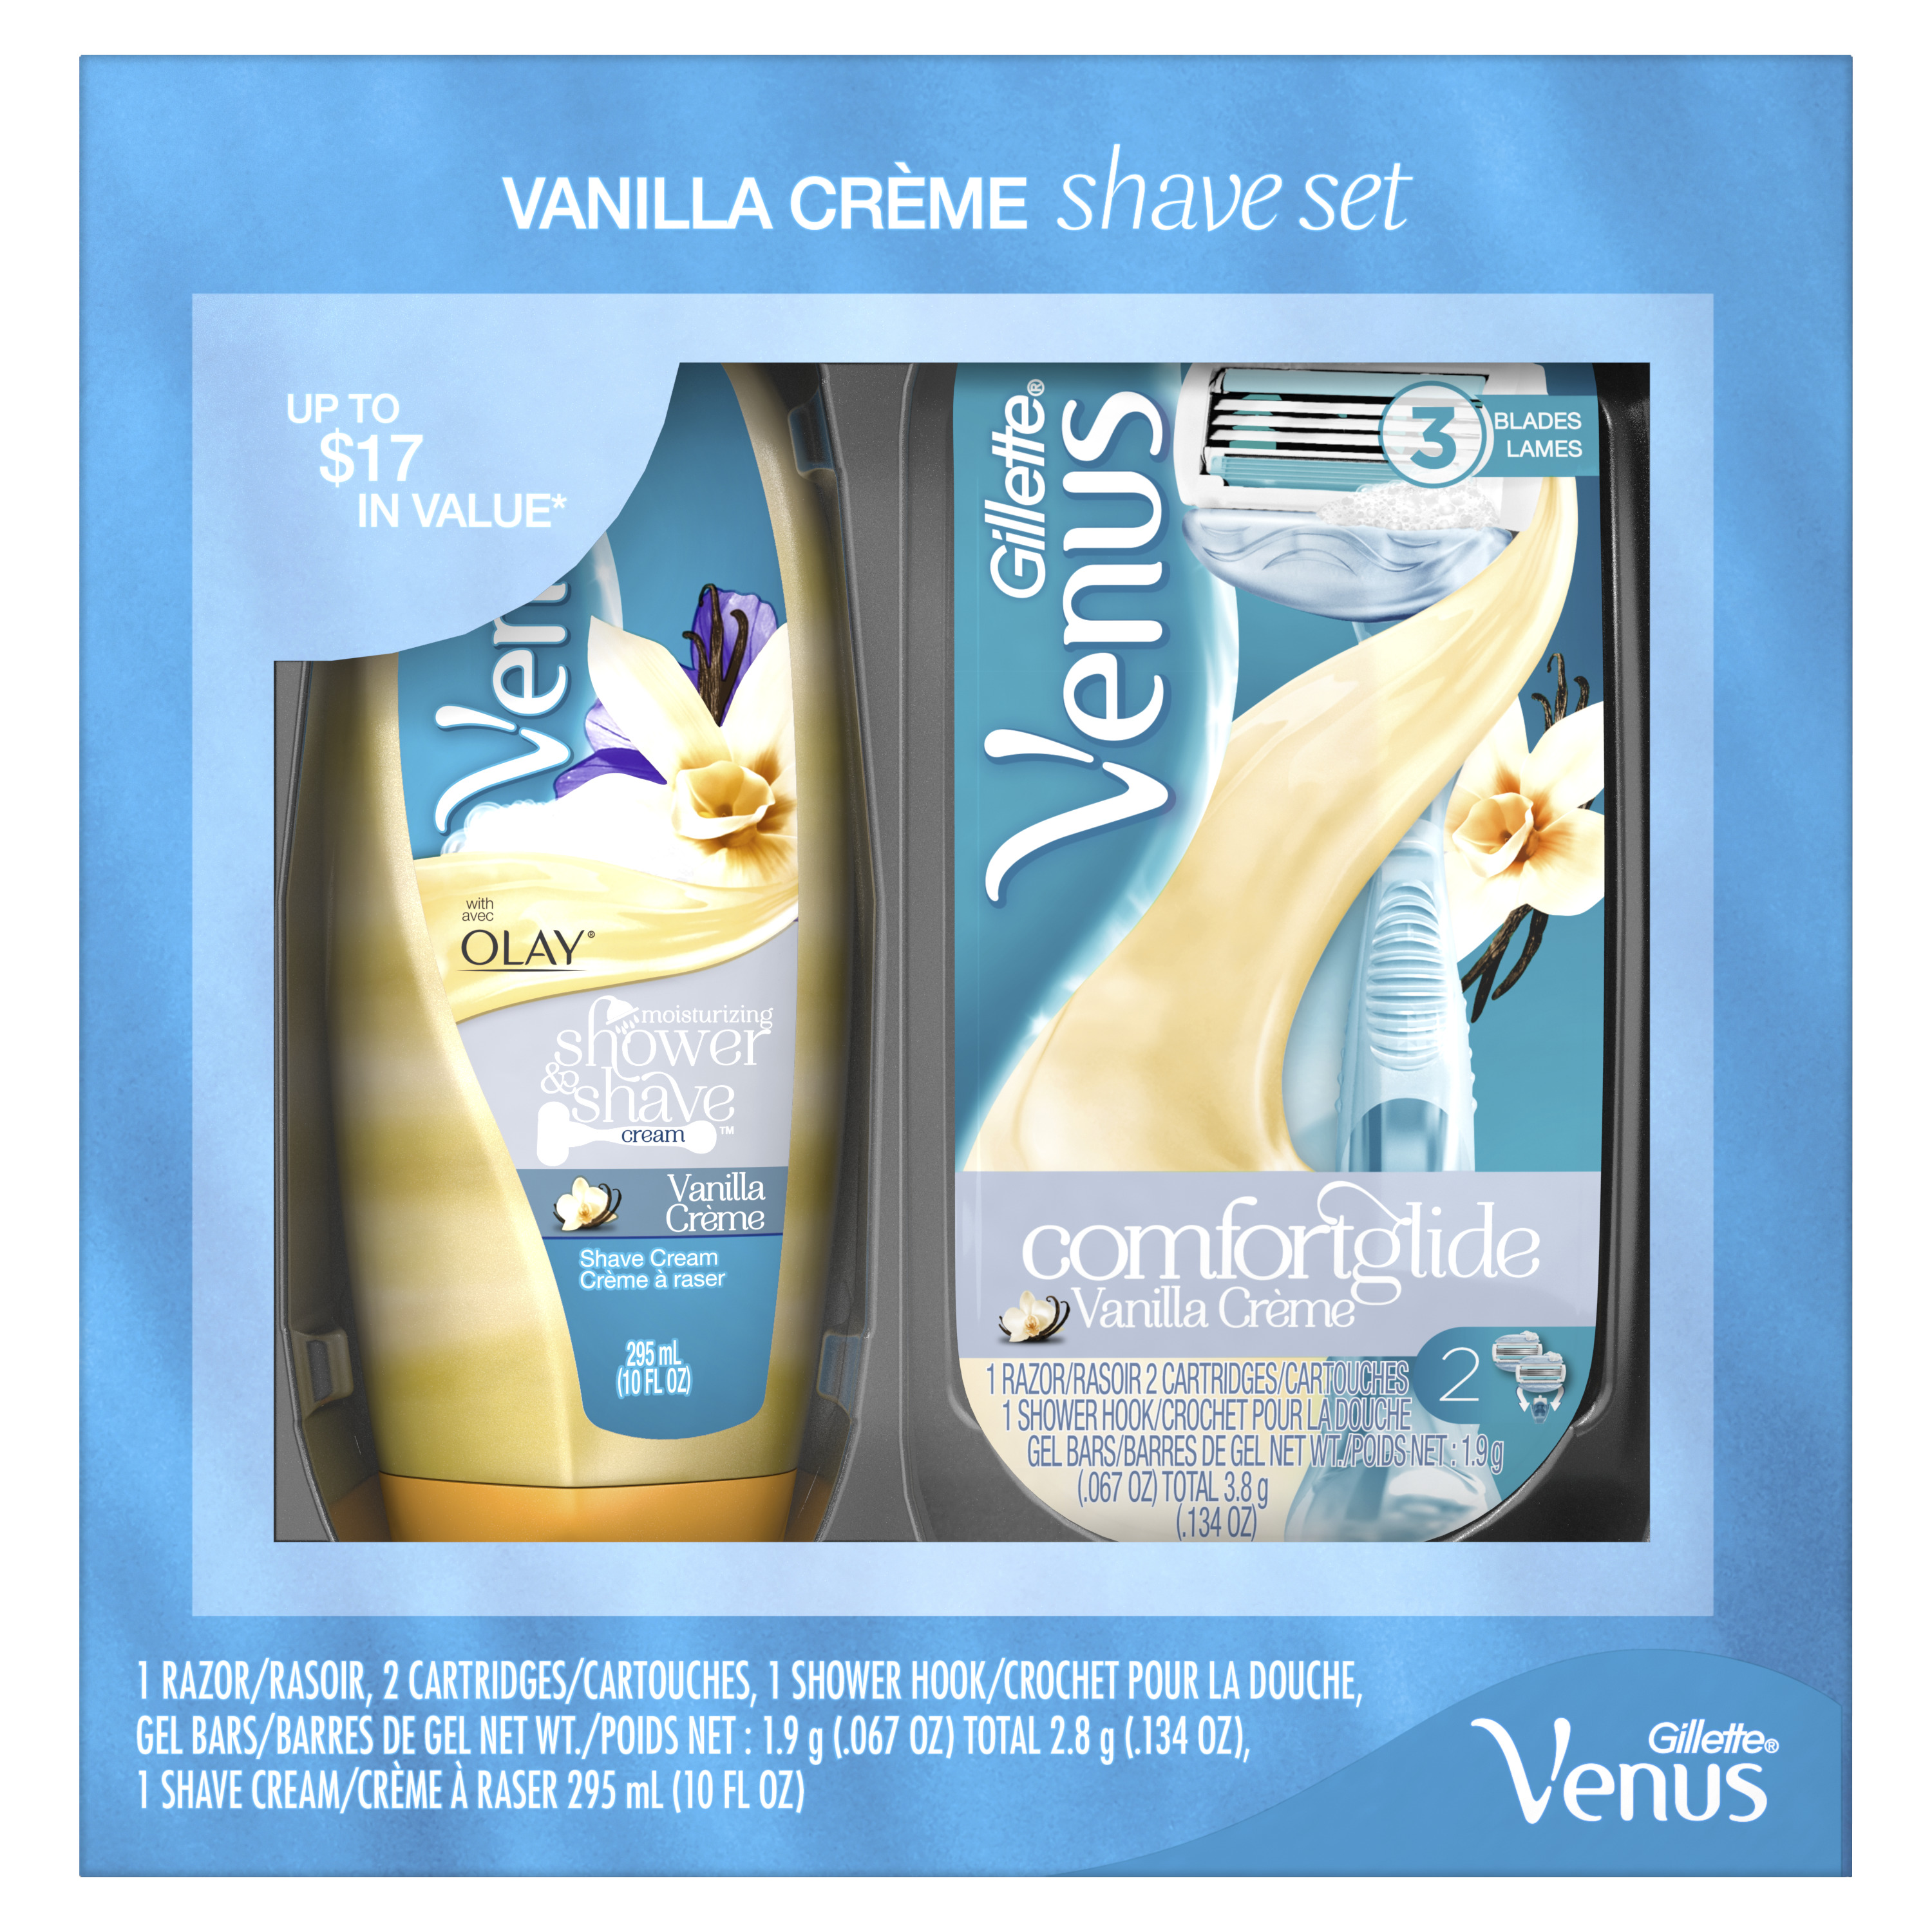 Gillette Venus and Olay Vanilla Crme Female Shave Gift Set - image 1 of 3